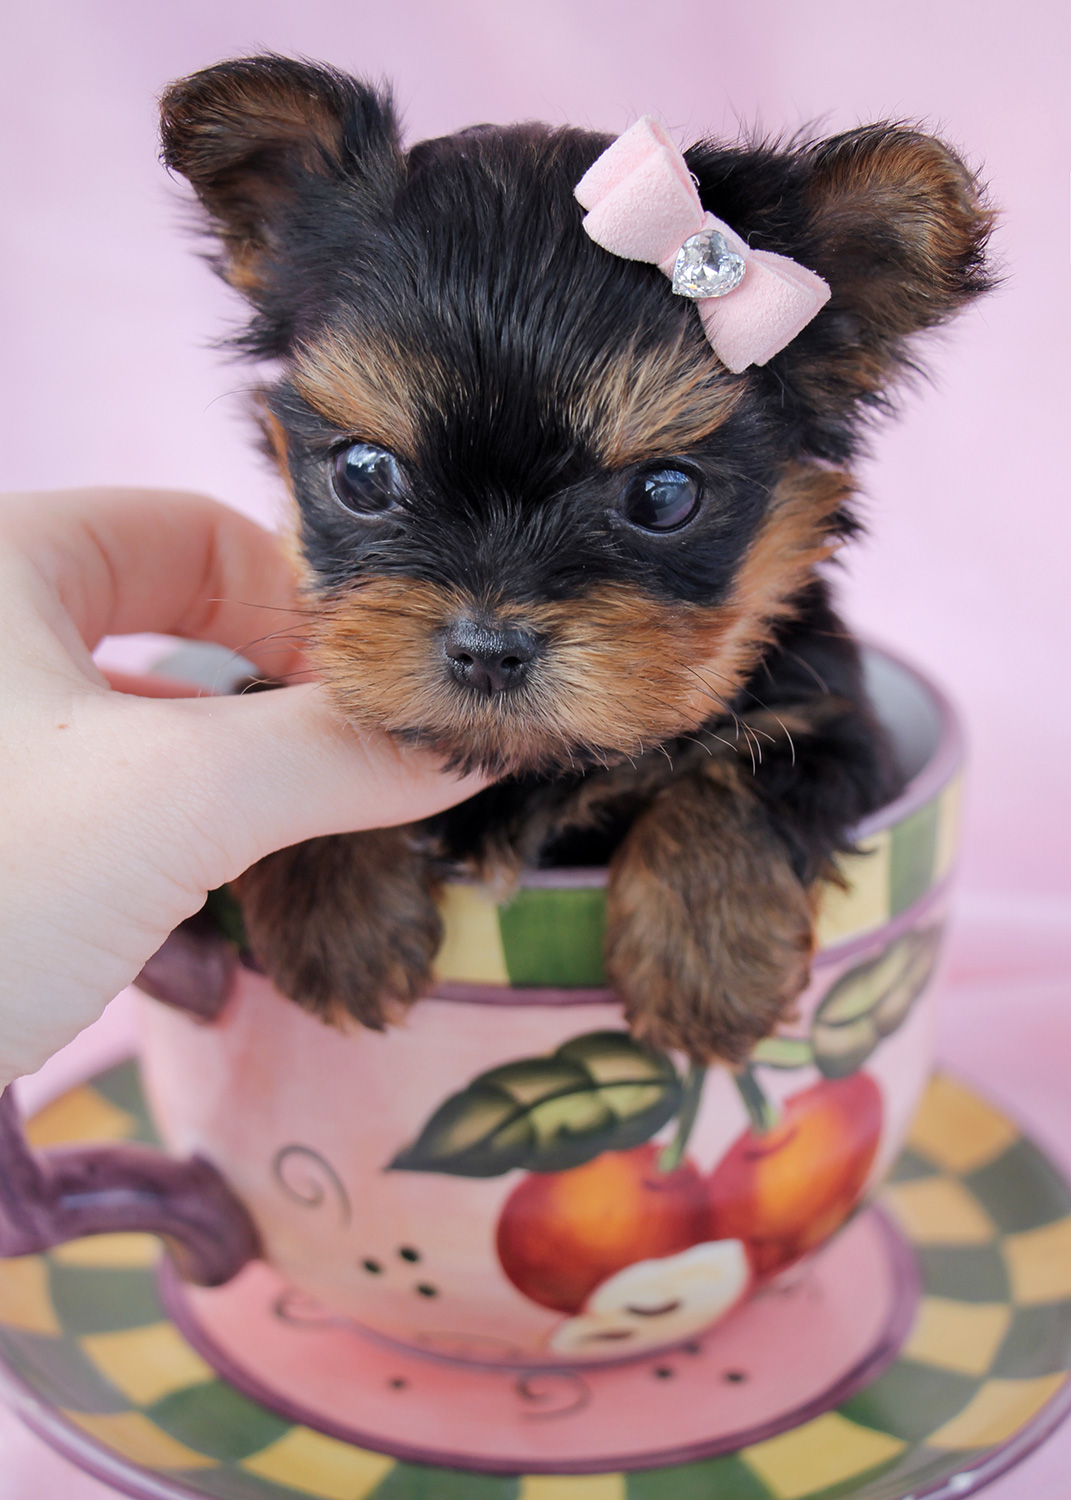 Chocolate Yorkie Puppies at TeaCups Puppies | Teacups ...